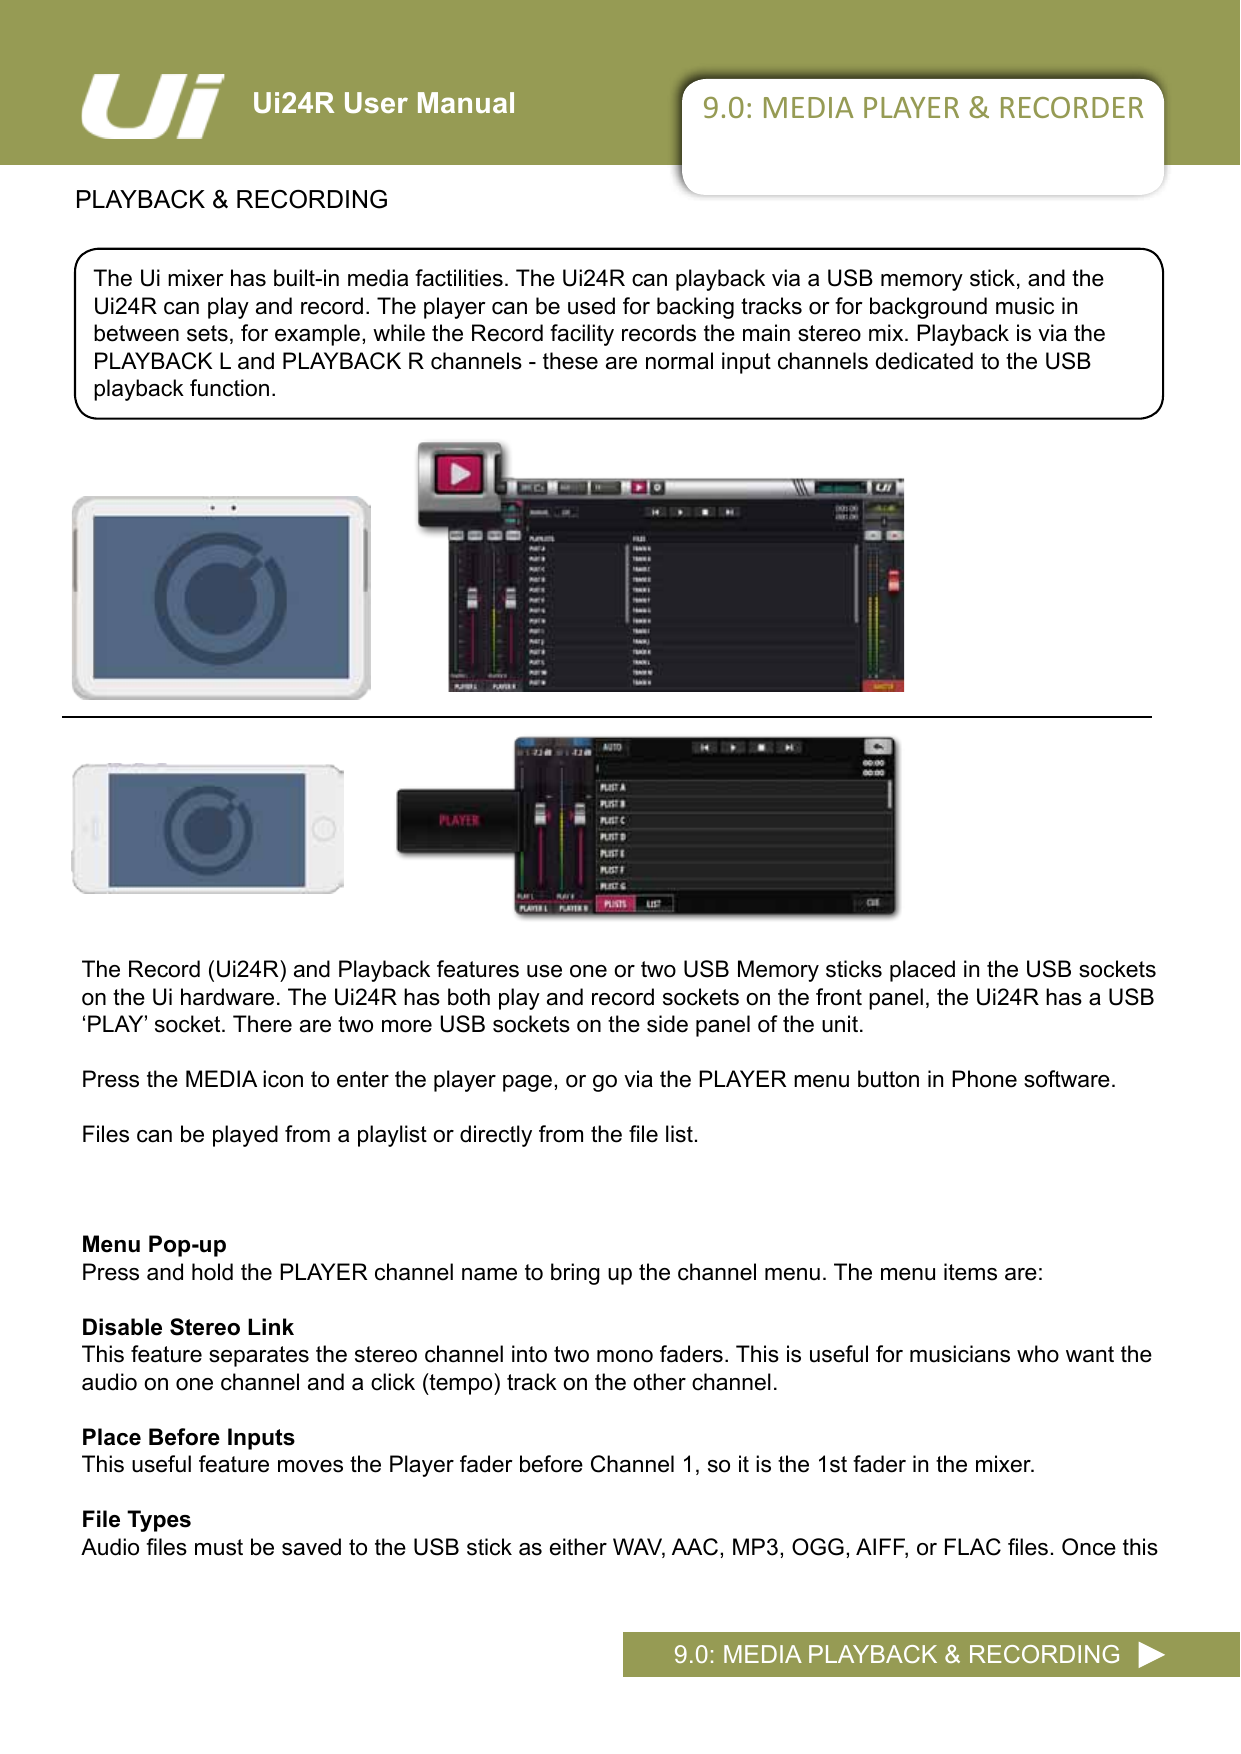 Ui24R User Manual 9.0: MEDIA PLAYER &amp; RECORDERPLAYBACK &amp; RECORDING9.0: MEDIA PLAYBACK &amp; RECORDINGThe Ui mixer has built-in media factilities. The Ui24R can playback via a USB memory stick, and the Ui24R can play and record. The player can be used for backing tracks or for background music in between sets, for example, while the Record facility records the main stereo mix. Playback is via the PLAYBACK L and PLAYBACK R channels - these are normal input channels dedicated to the USB playback function.TheRecord(Ui24R)andPlaybackfeaturesuseoneortwoUSBMemorysticksplacedintheUSBsocketson the Ui hardware. The Ui24R has both play and record sockets on the front panel, the Ui24R has a USB ‘PLAY’socket.TherearetwomoreUSBsocketsonthesidepaneloftheunit.Press the MEDIA icon to enter the player page, or go via the PLAYER menu button in Phone software.Filescanbeplayedfromaplaylistordirectlyfromthelelist.Menu Pop-upPress and hold the PLAYER channel name to bring up the channel menu. The menu items are:Disable Stereo LinkThis feature separates the stereo channel into two mono faders. This is useful for musicians who want the audioononechannelandaclick(tempo)trackontheotherchannel.Place Before InputsThis useful feature moves the Player fader before Channel 1, so it is the 1st fader in the mixer. File TypesAudiolesmustbesavedtotheUSBstickaseitherWAV,AAC,MP3,OGG,AIFF,orFLACles.Oncethis